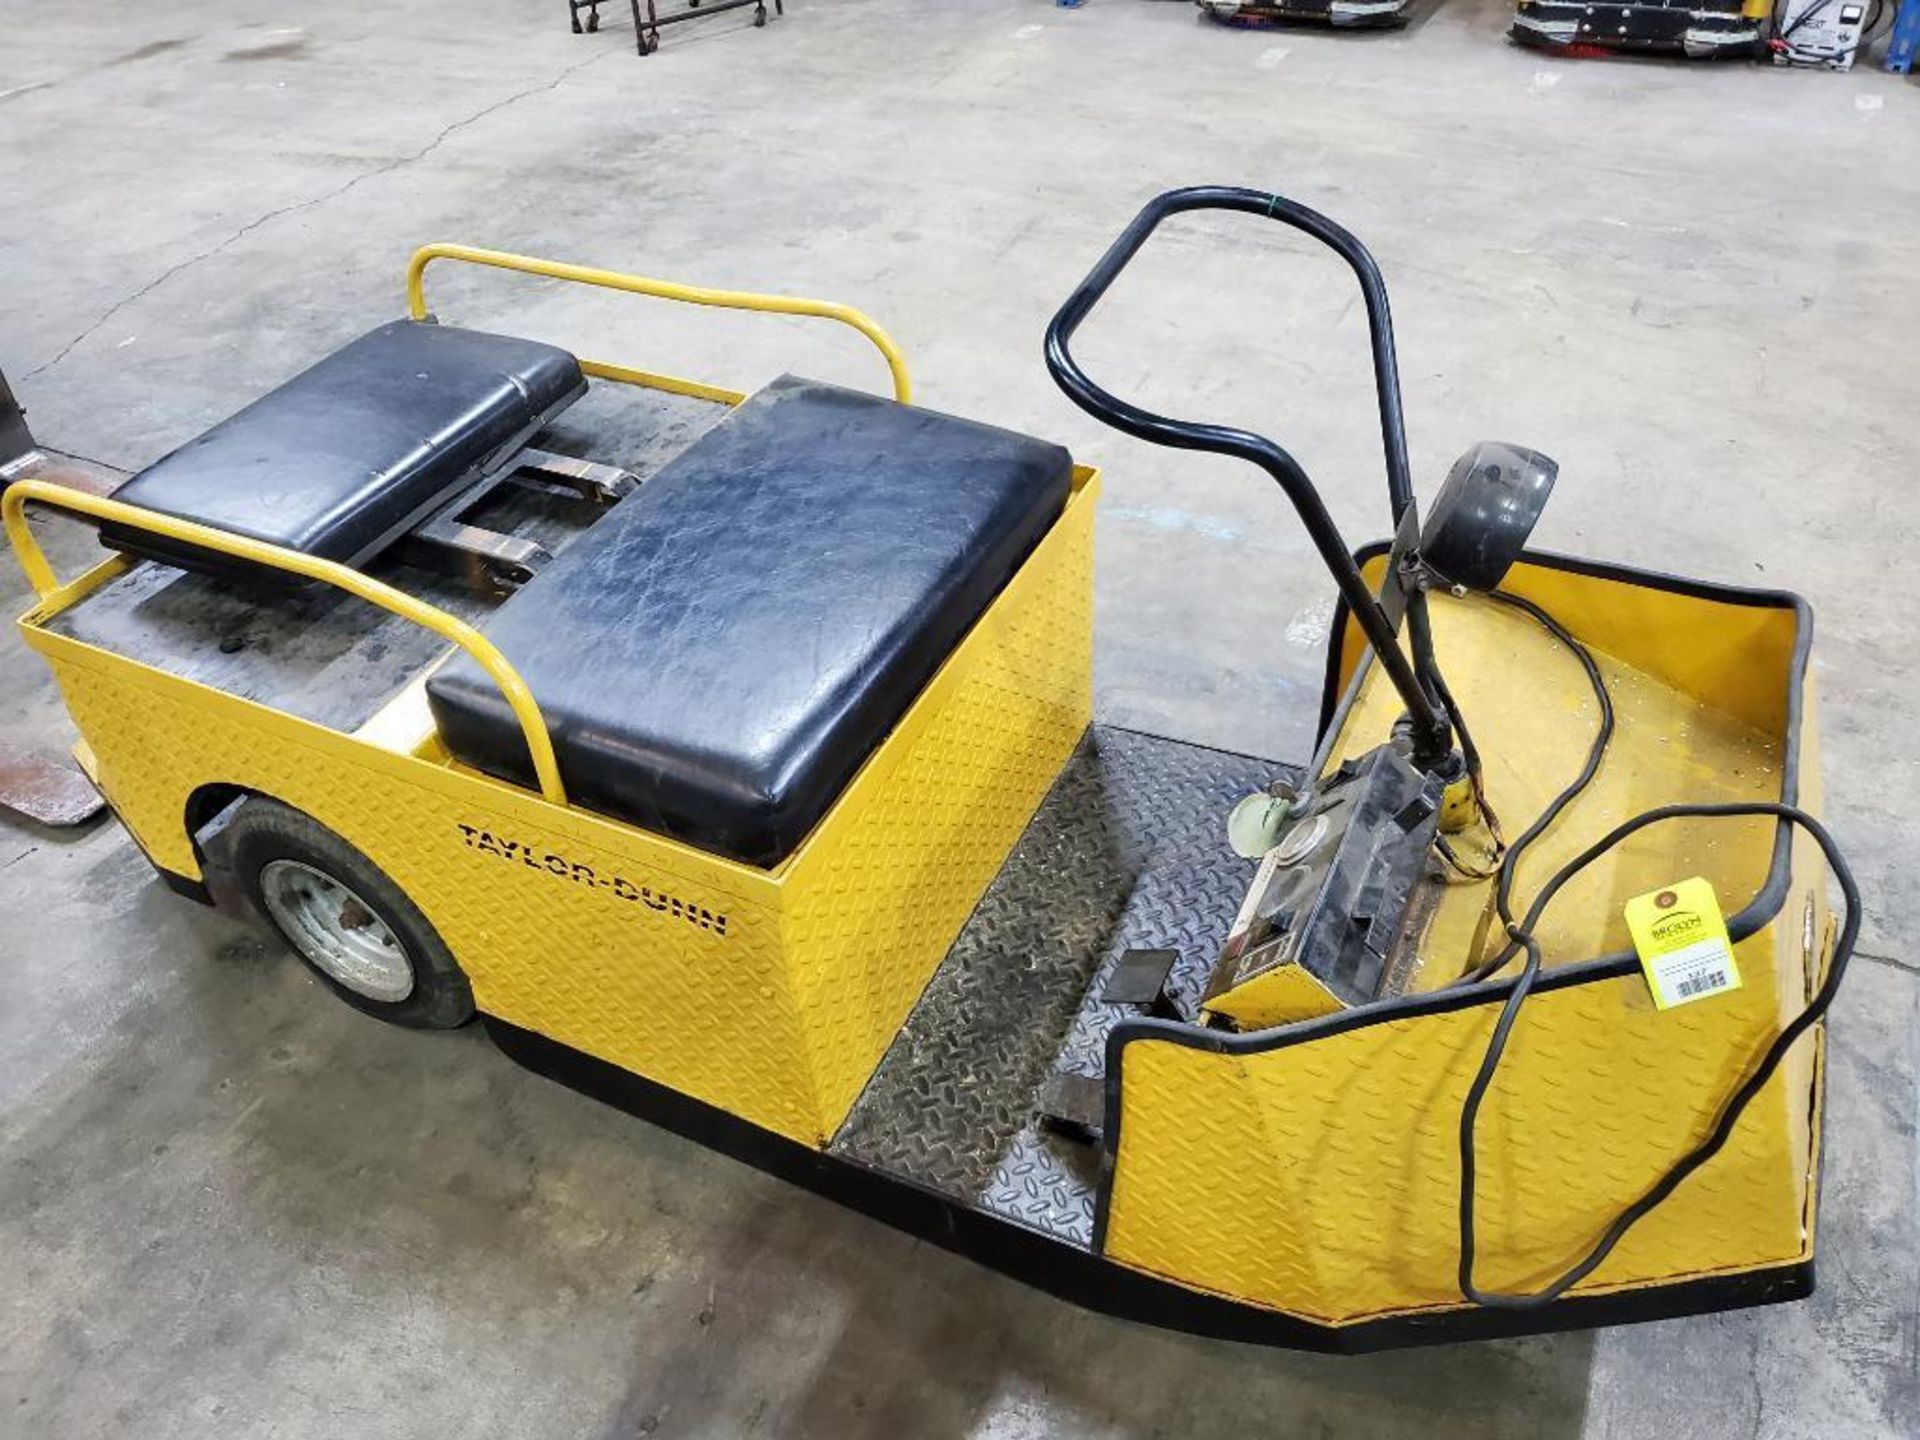 Taylor Dunn electric factory cart. 24 volt. Said to have newer batteries.